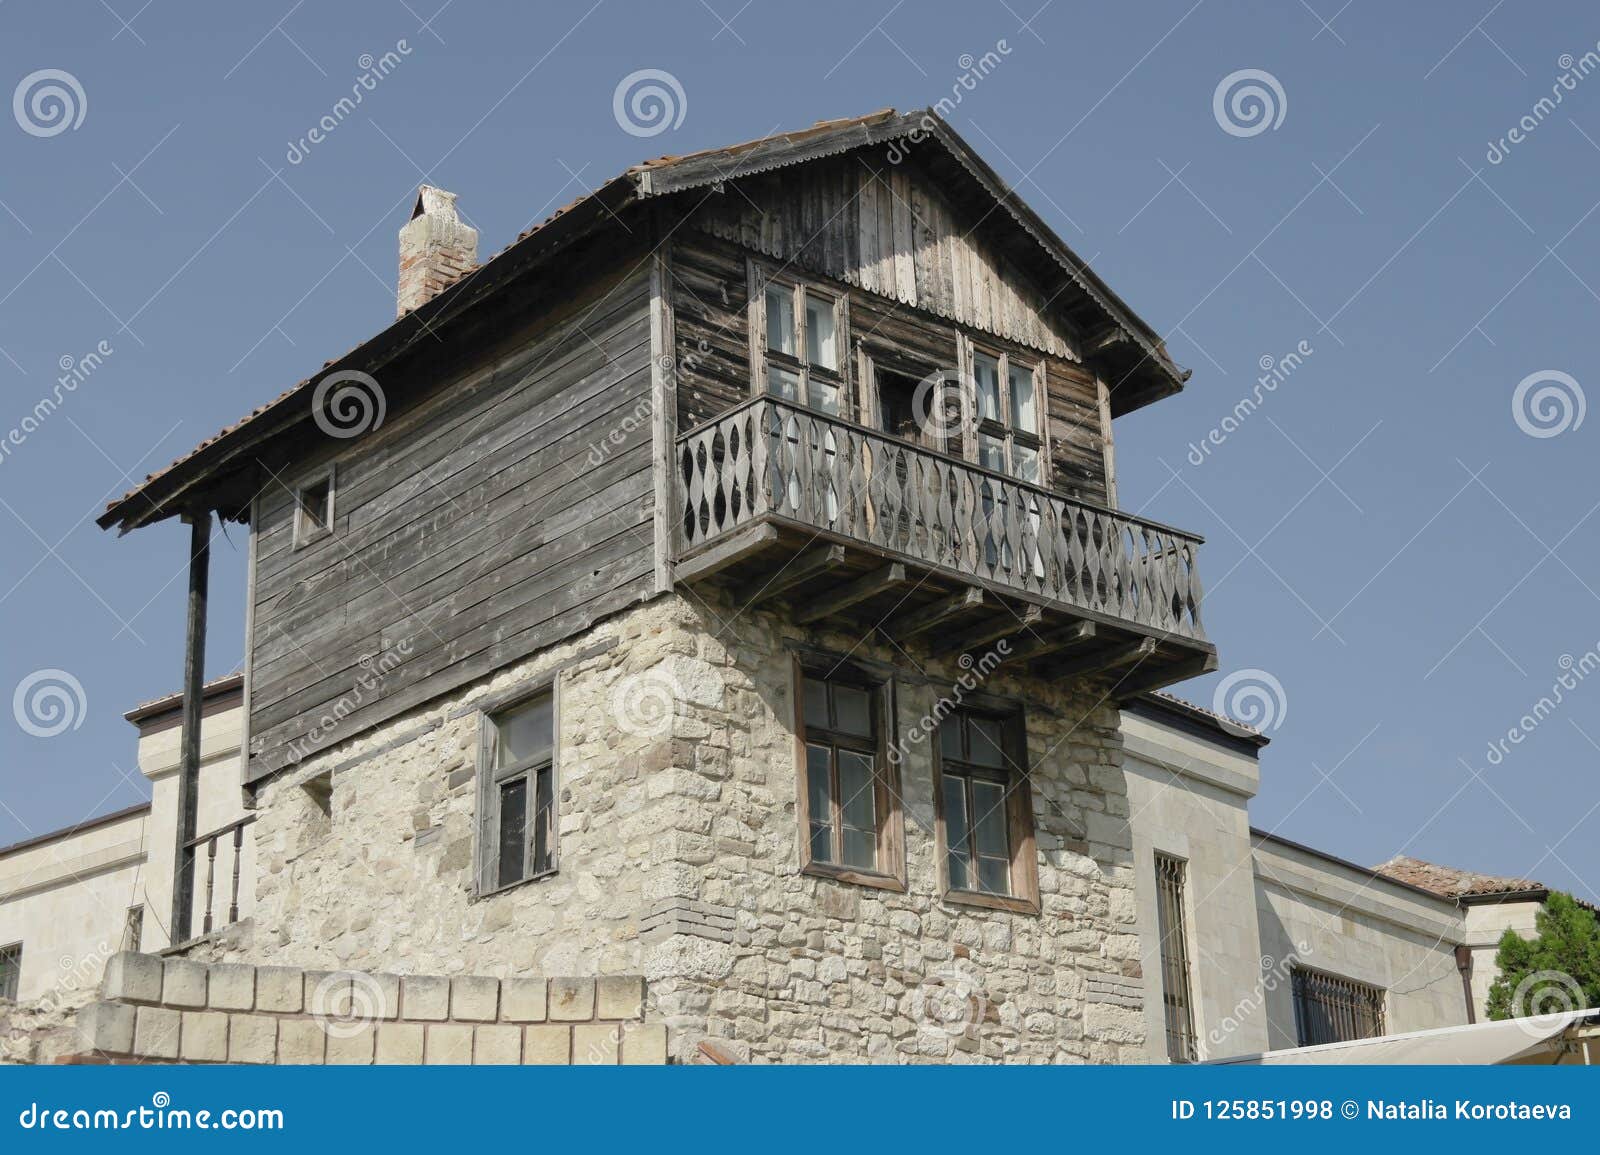 Old Stone And Wood House With Tiled Roof In Bulgaria Stock Photo